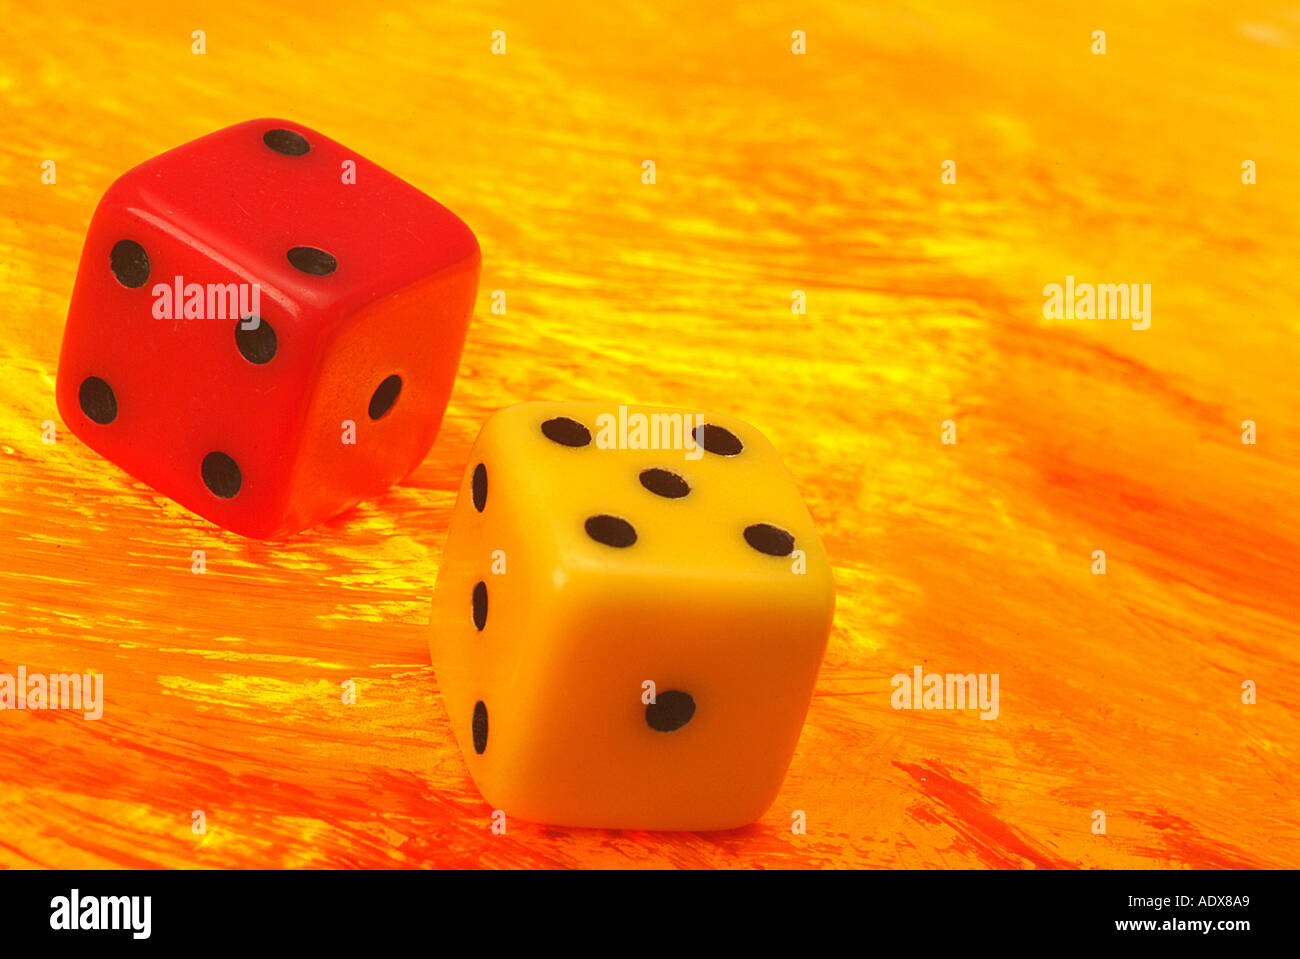 Business Concepts II holding dice die chance gambling bone bones throw luck roll stock market fiery reddish red yellow Stock Photo